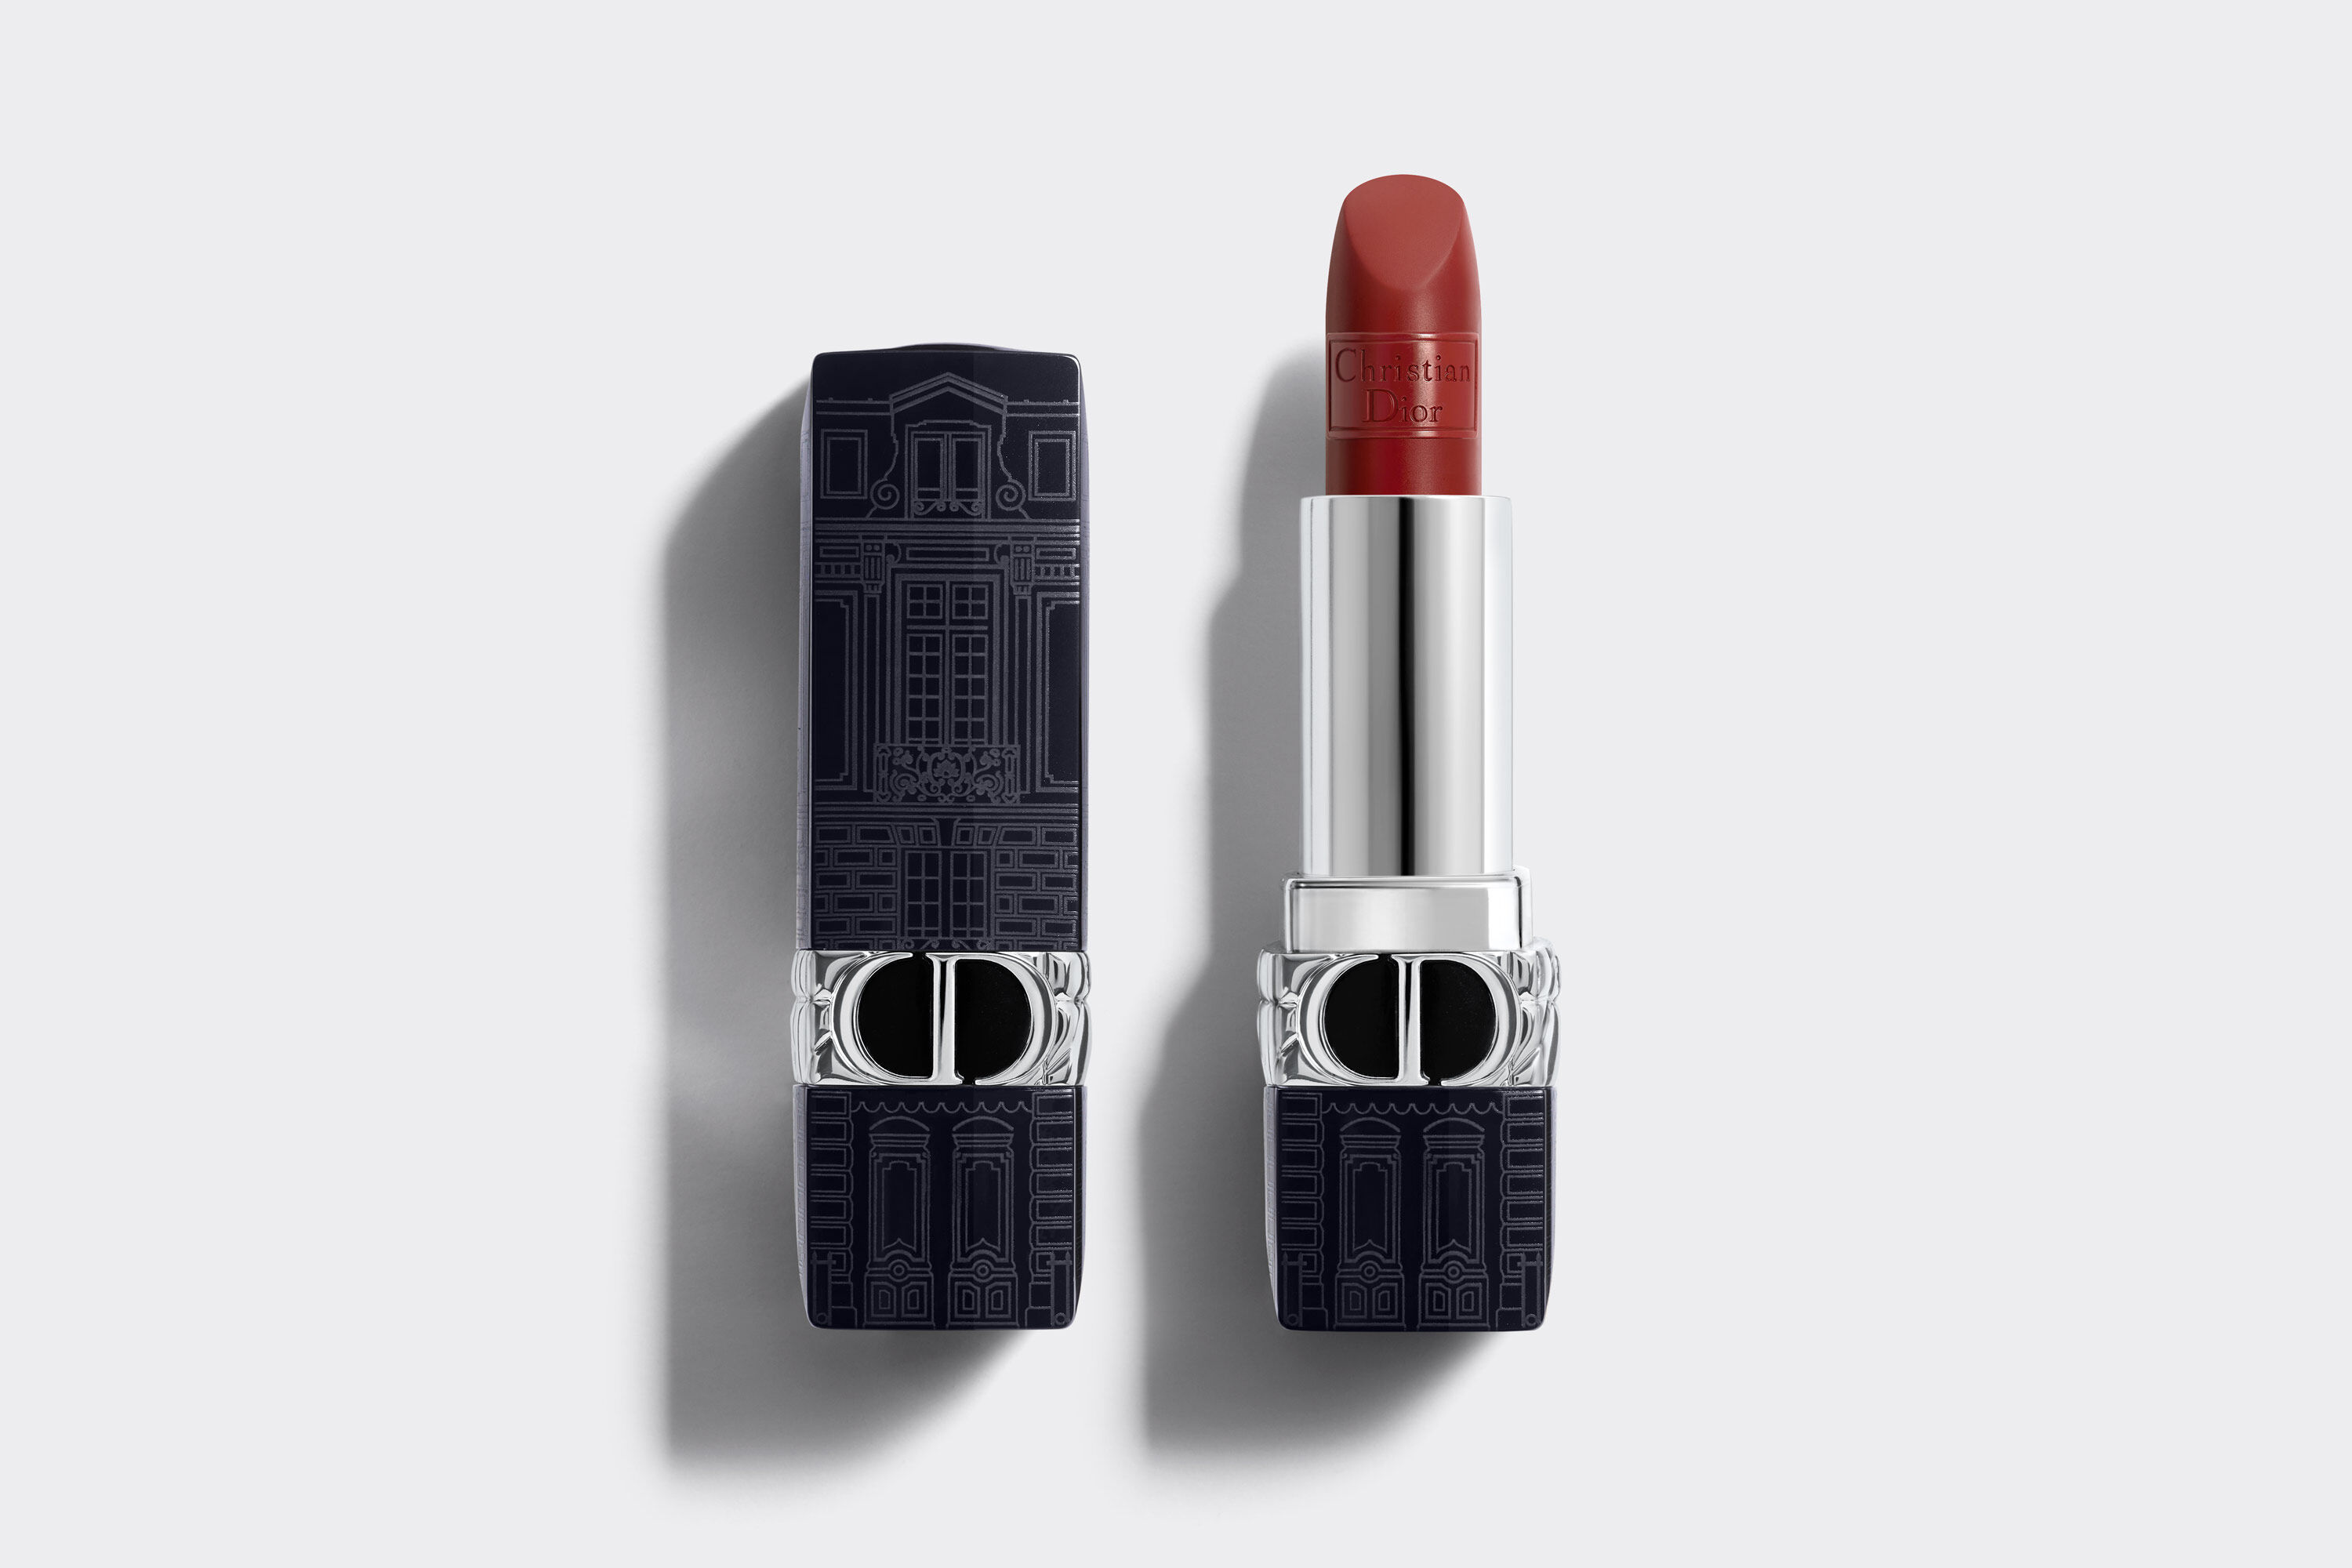 Doodt binden aankomst Rouge Dior The Atelier of Dreams Limited Edition Lipstick | DIOR